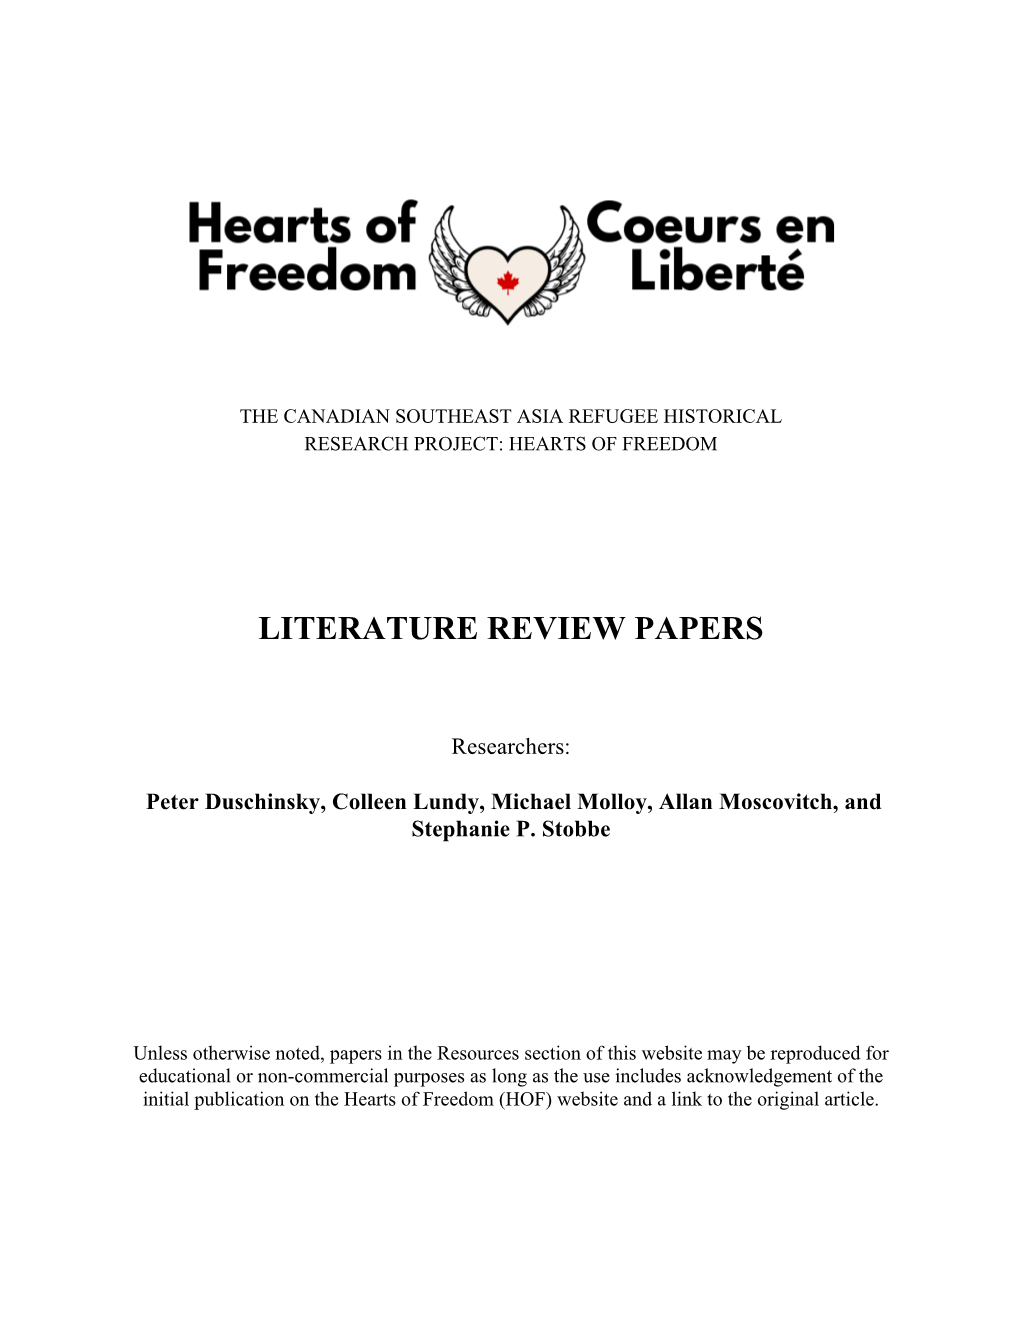 Literature Review Papers